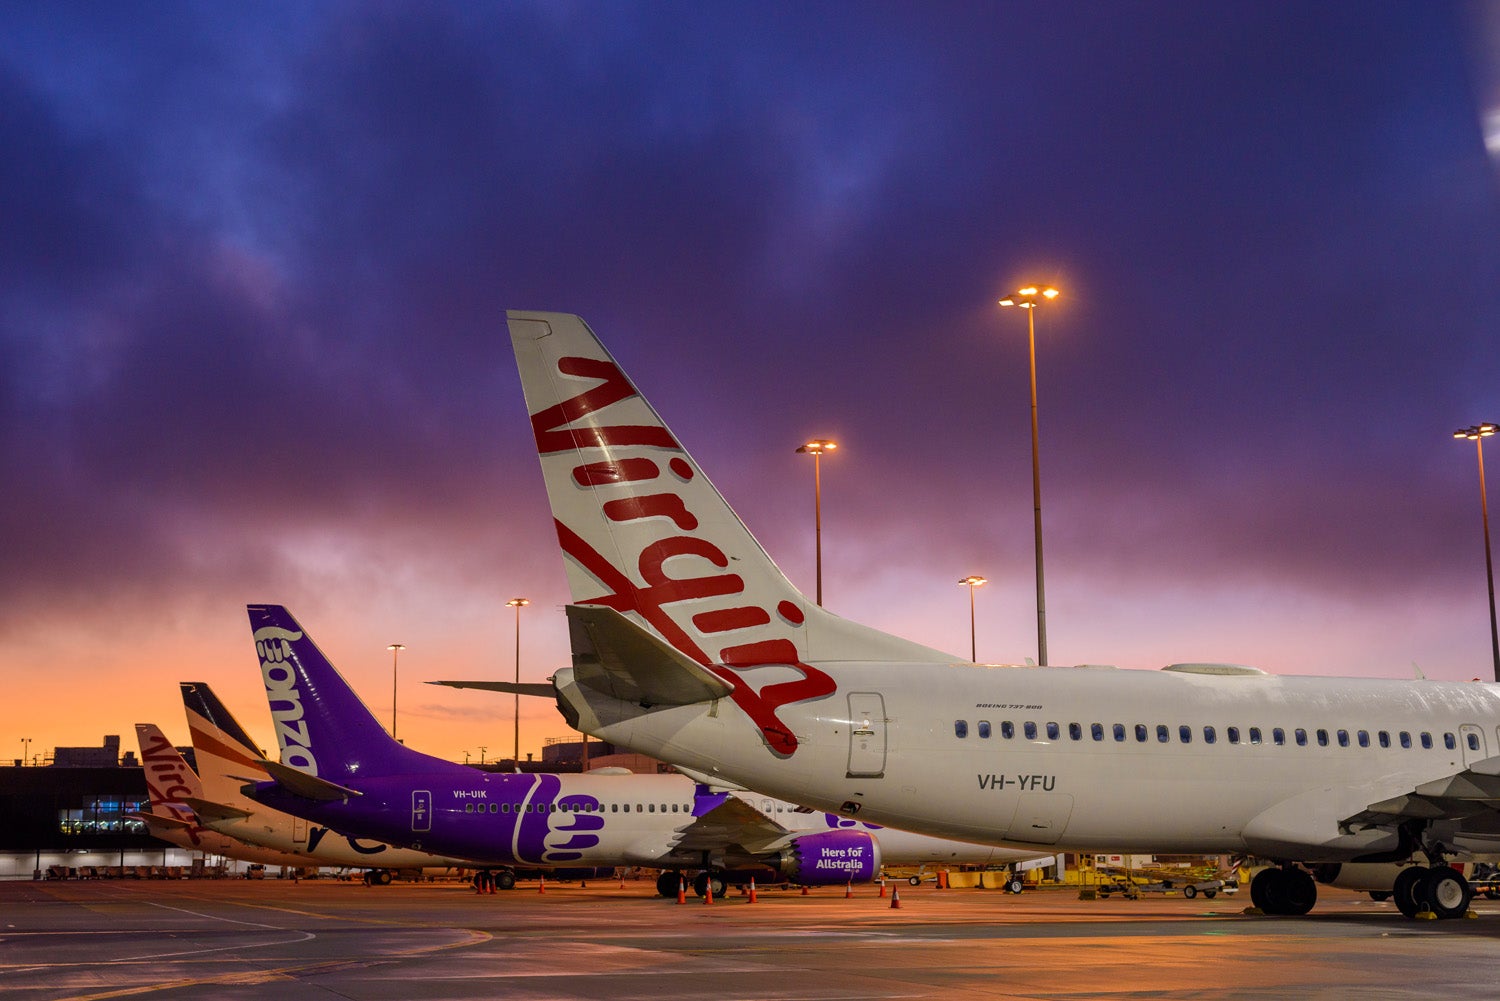 Sunset photo with airline tails